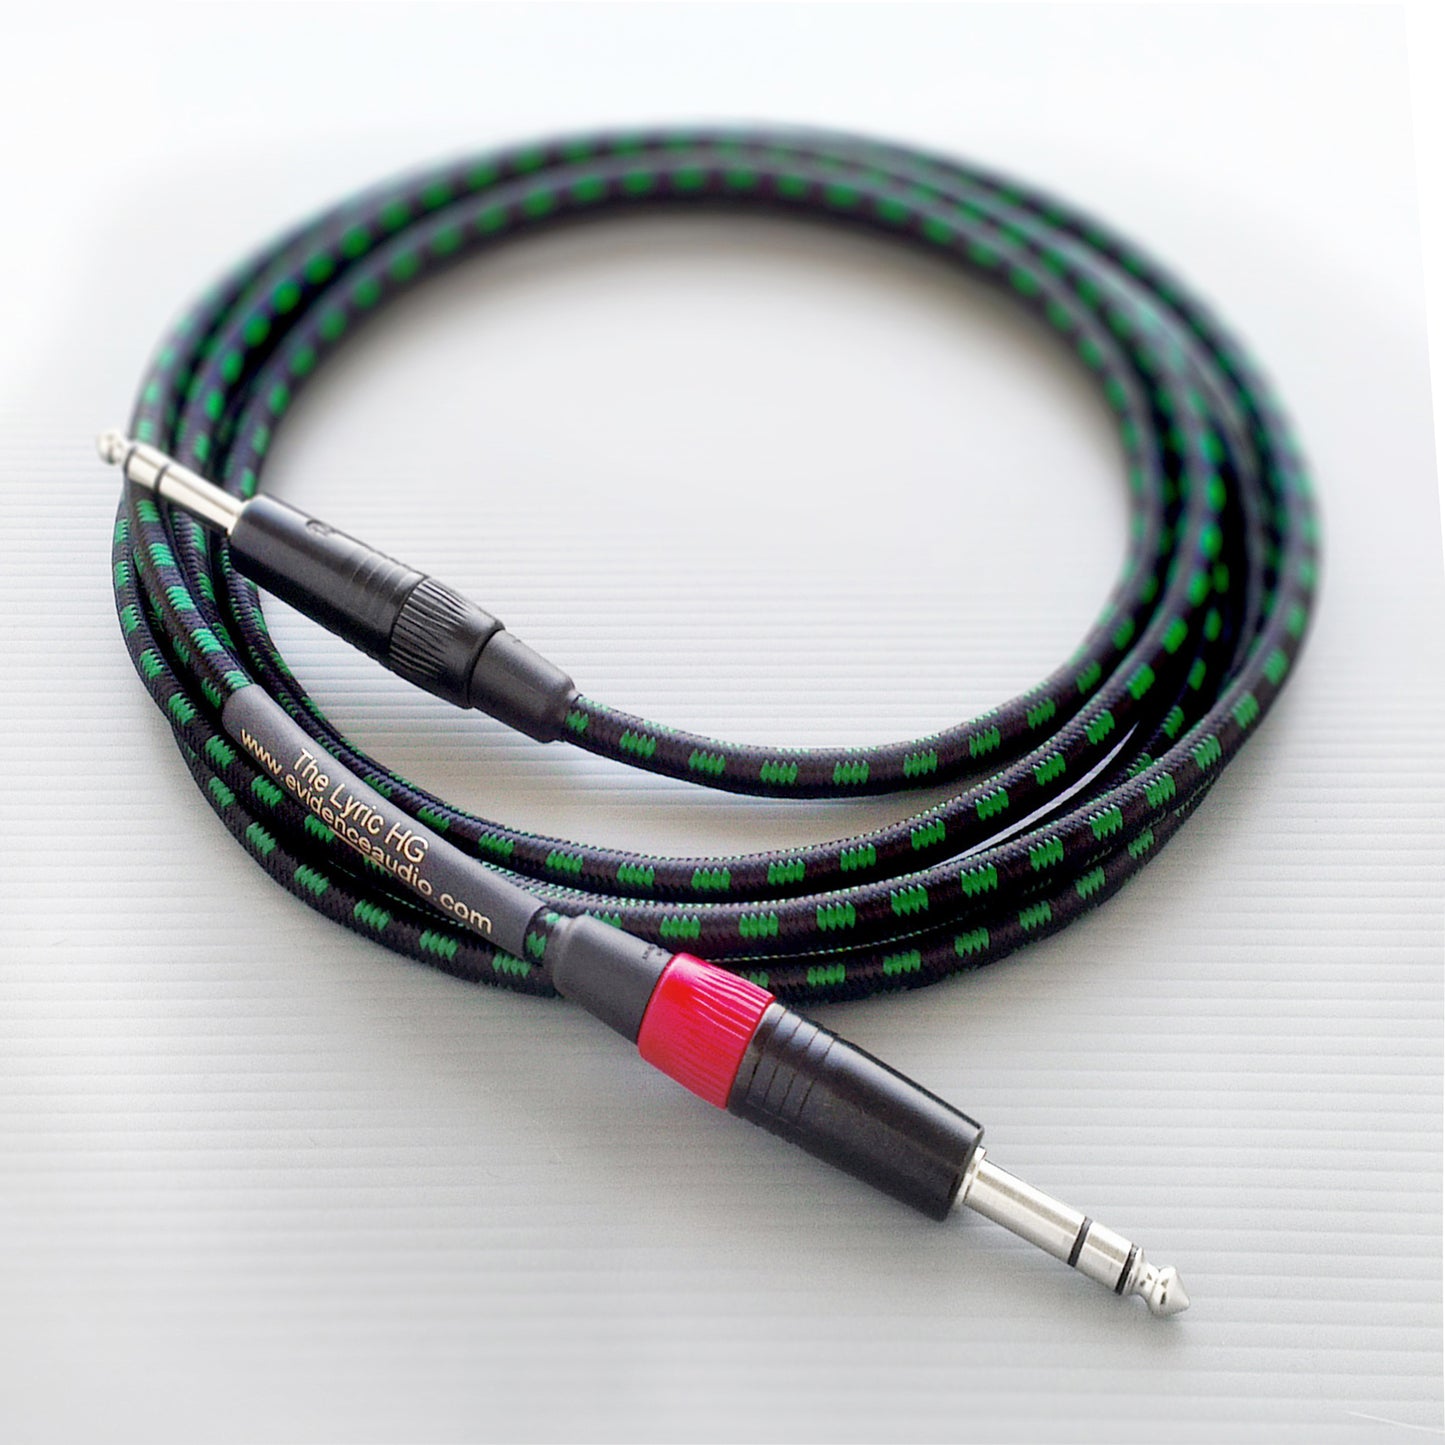 The Lyric HG Audio Cable